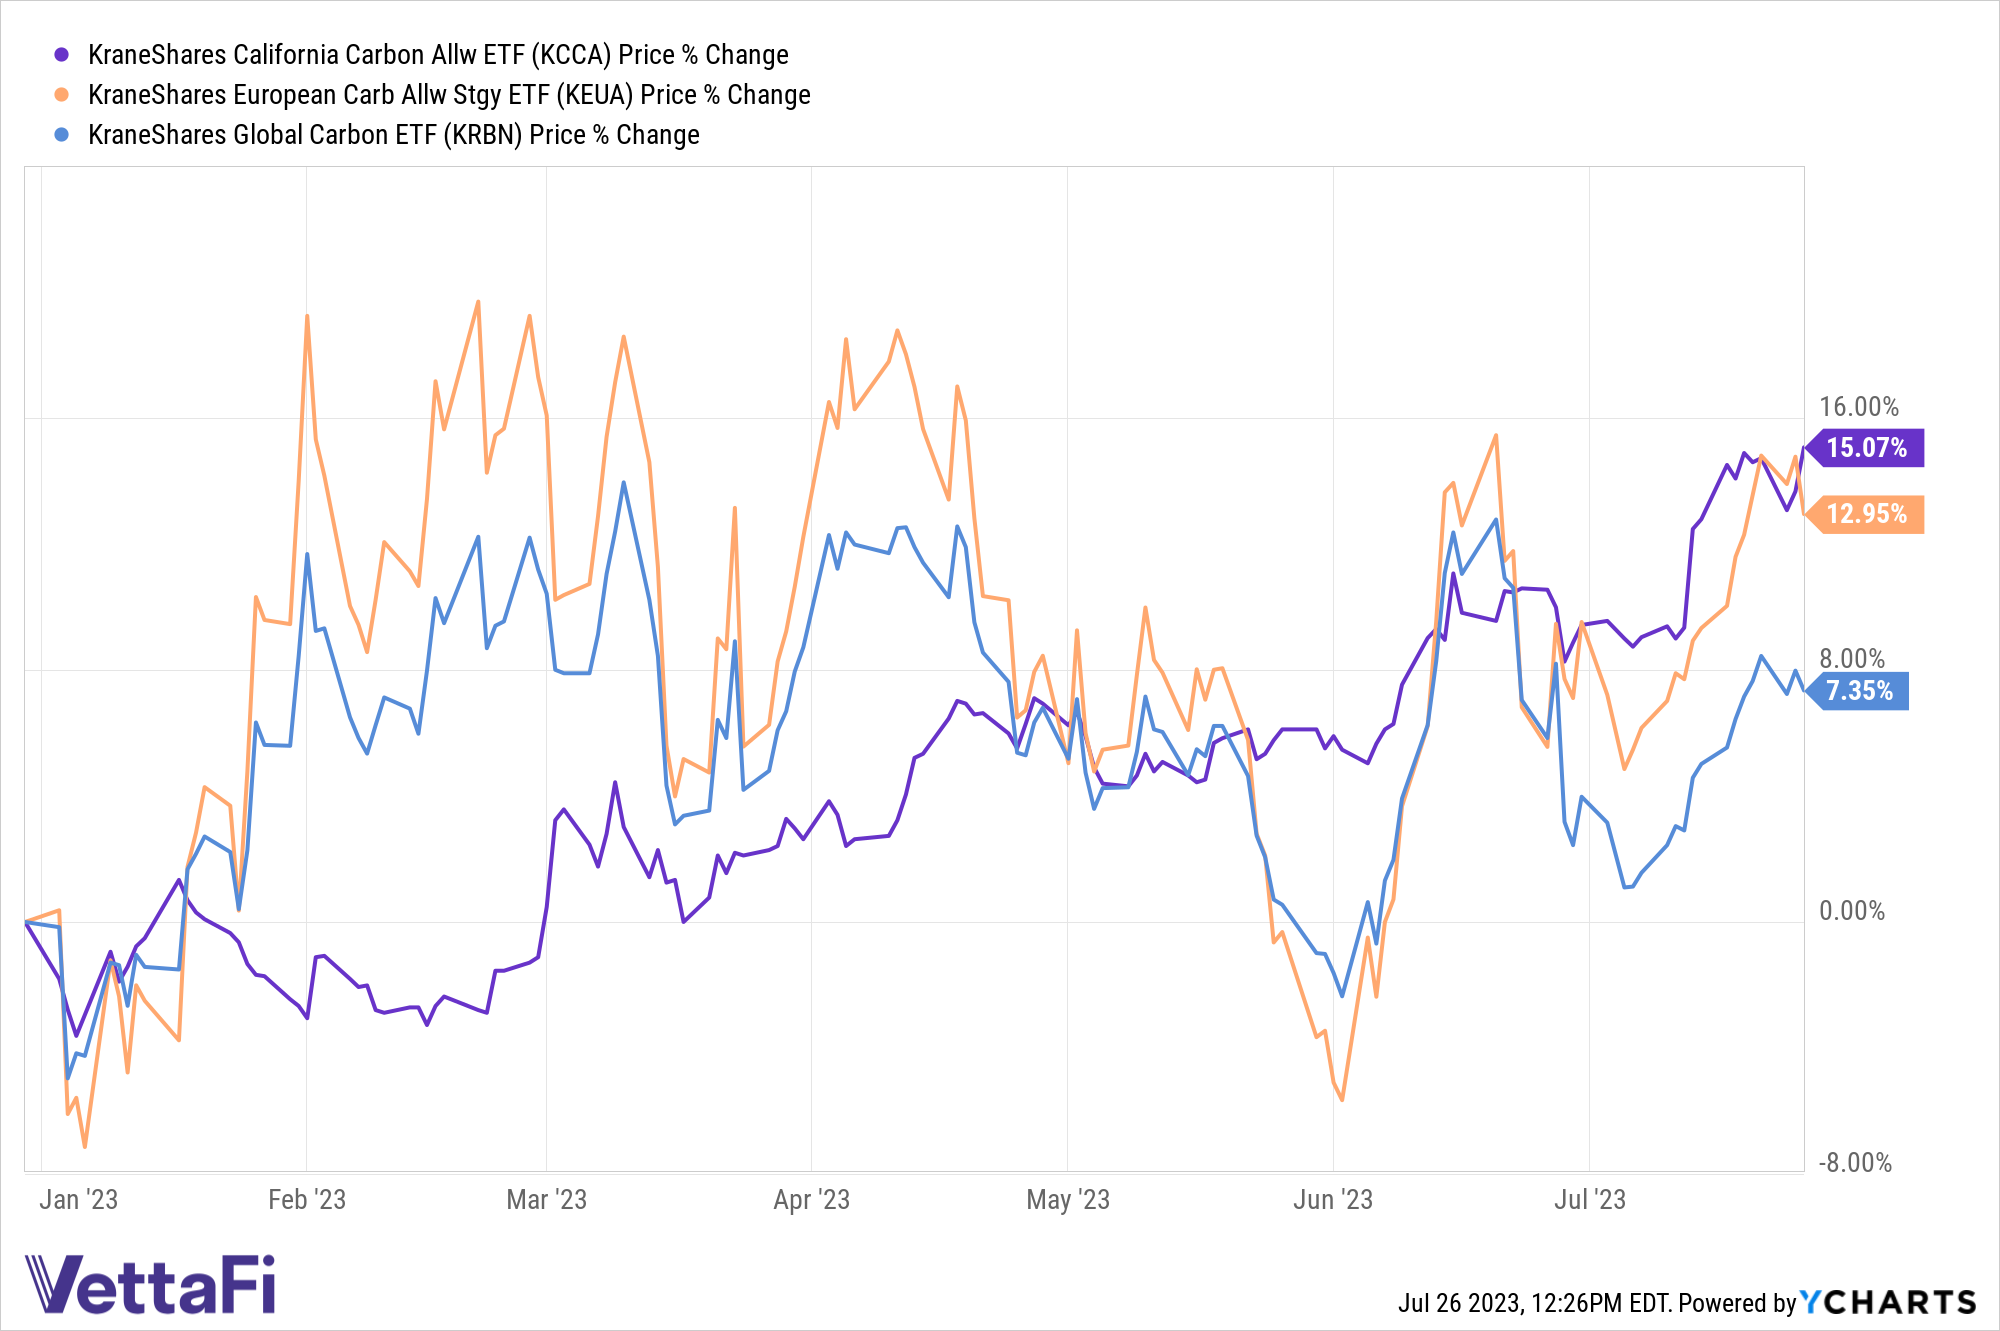 Price chart of KCCA, KEUA, and KRBN YTD, the world's most liquid carbon markets. 